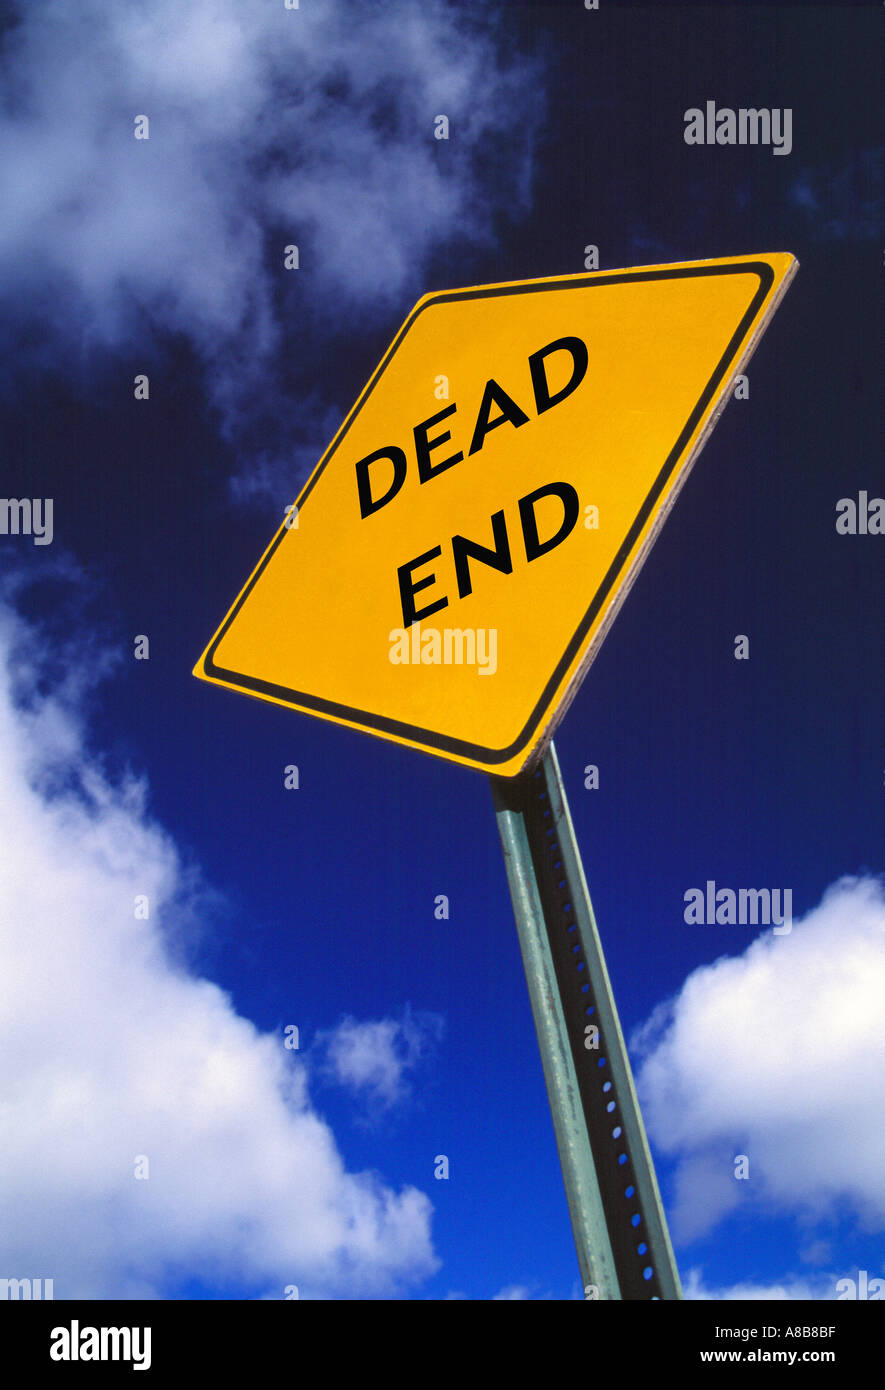 Dead End Road sign Stockfoto